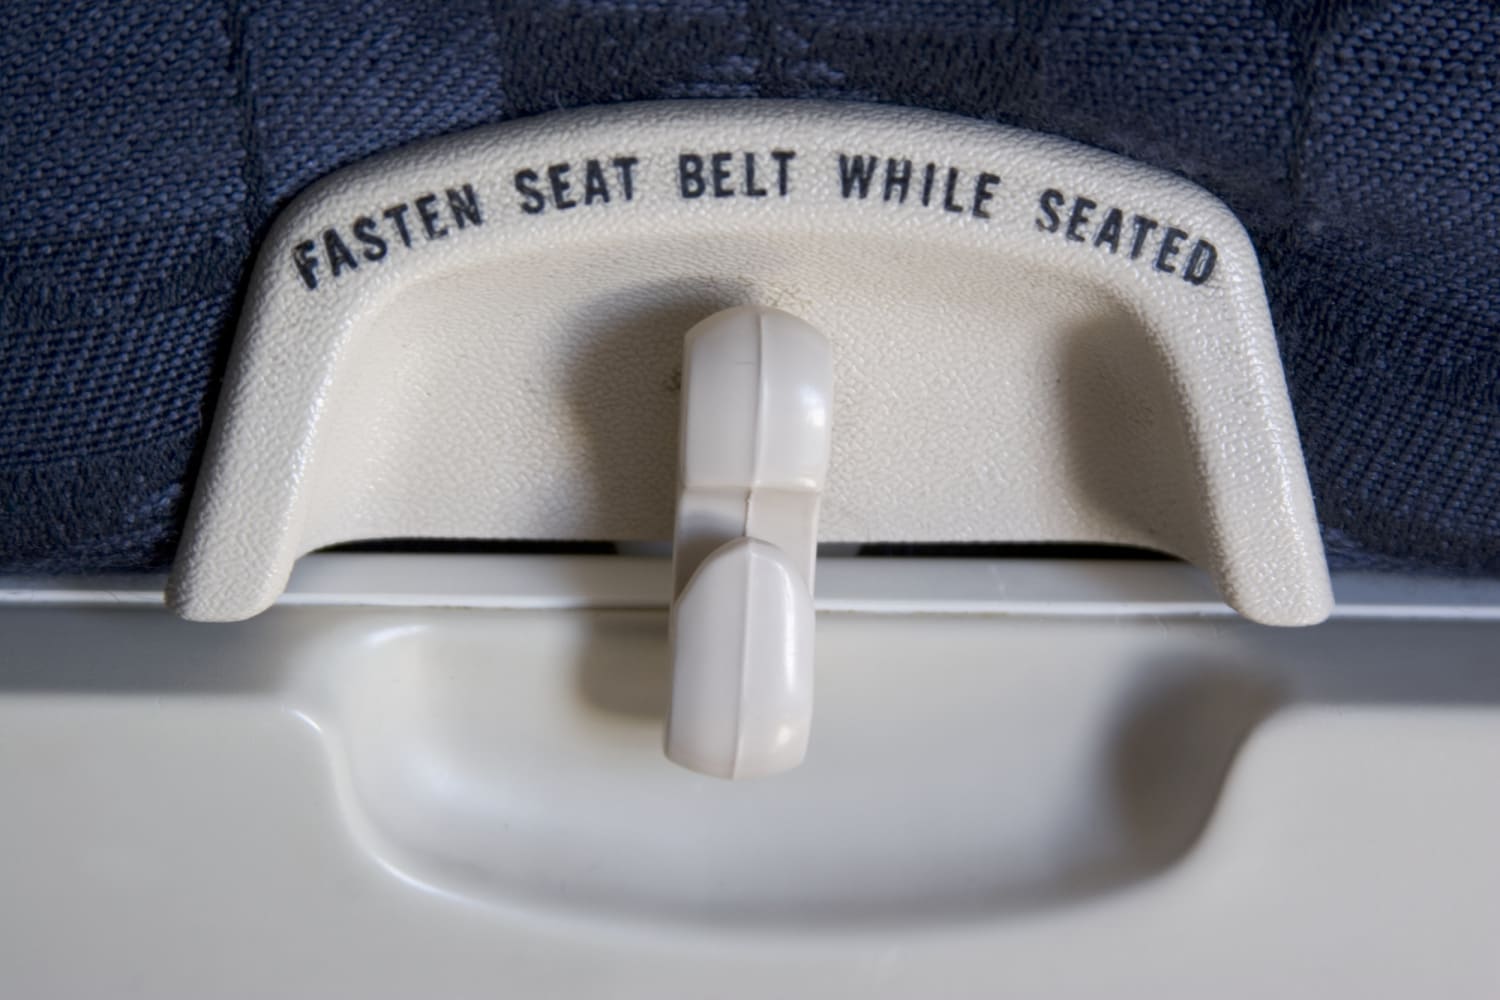 Eew! Headrest, seat pocket are the germiest spots on a plane: Study